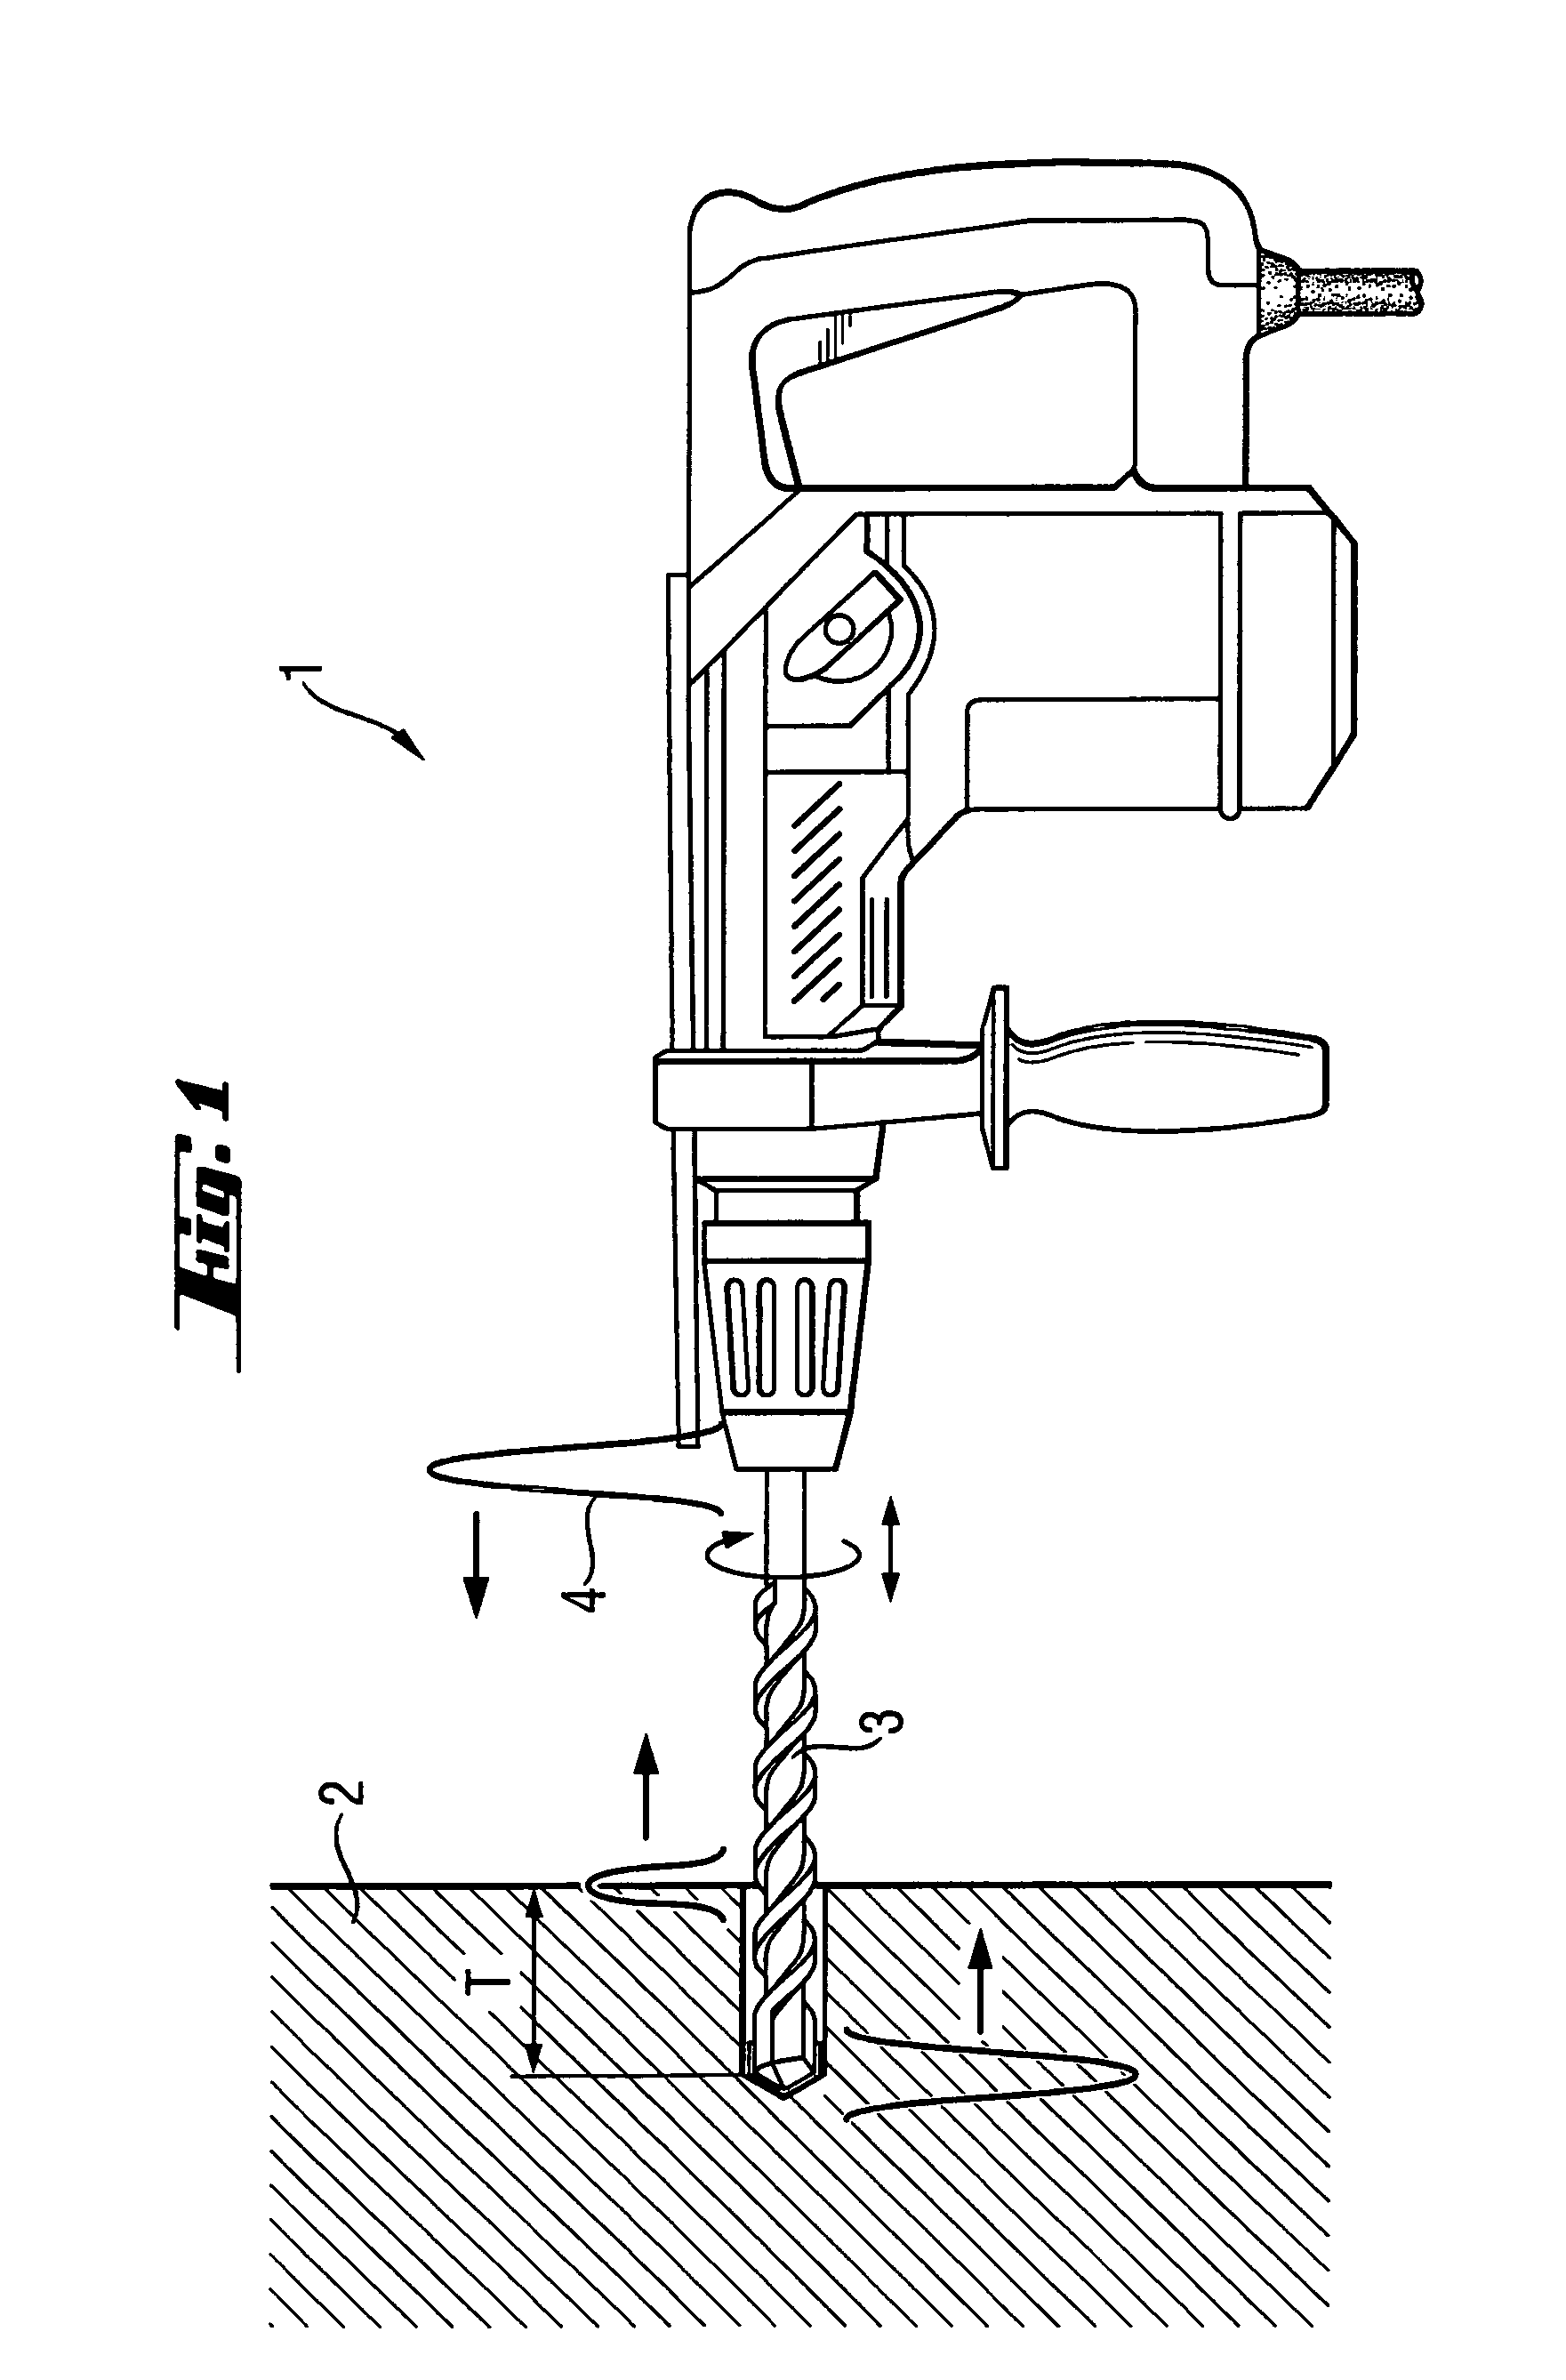 Power tool with measurement of a penetration depth of a working tool